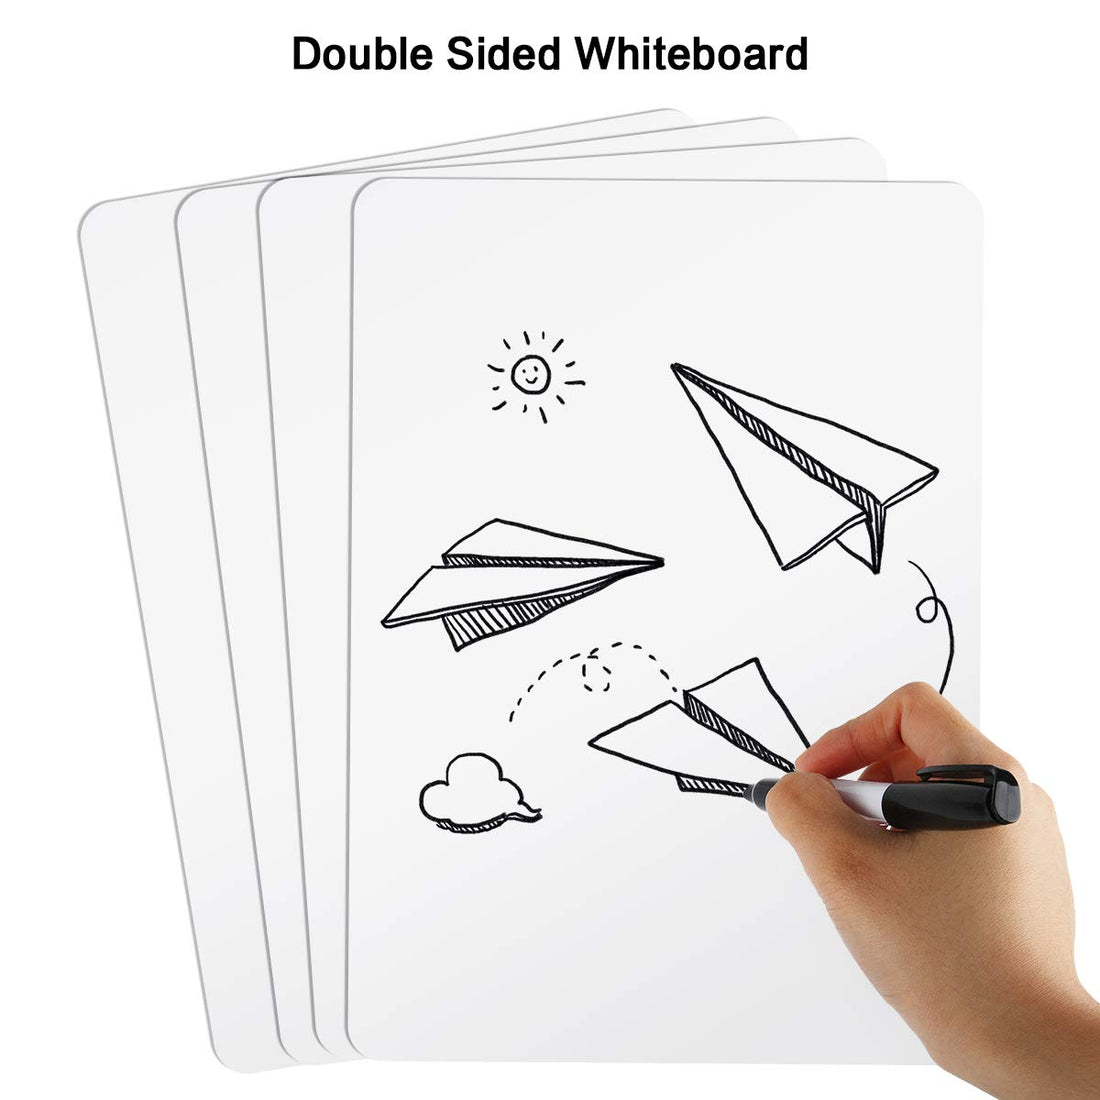 Bulk Dry Erase Boards: Essential Tools for Students